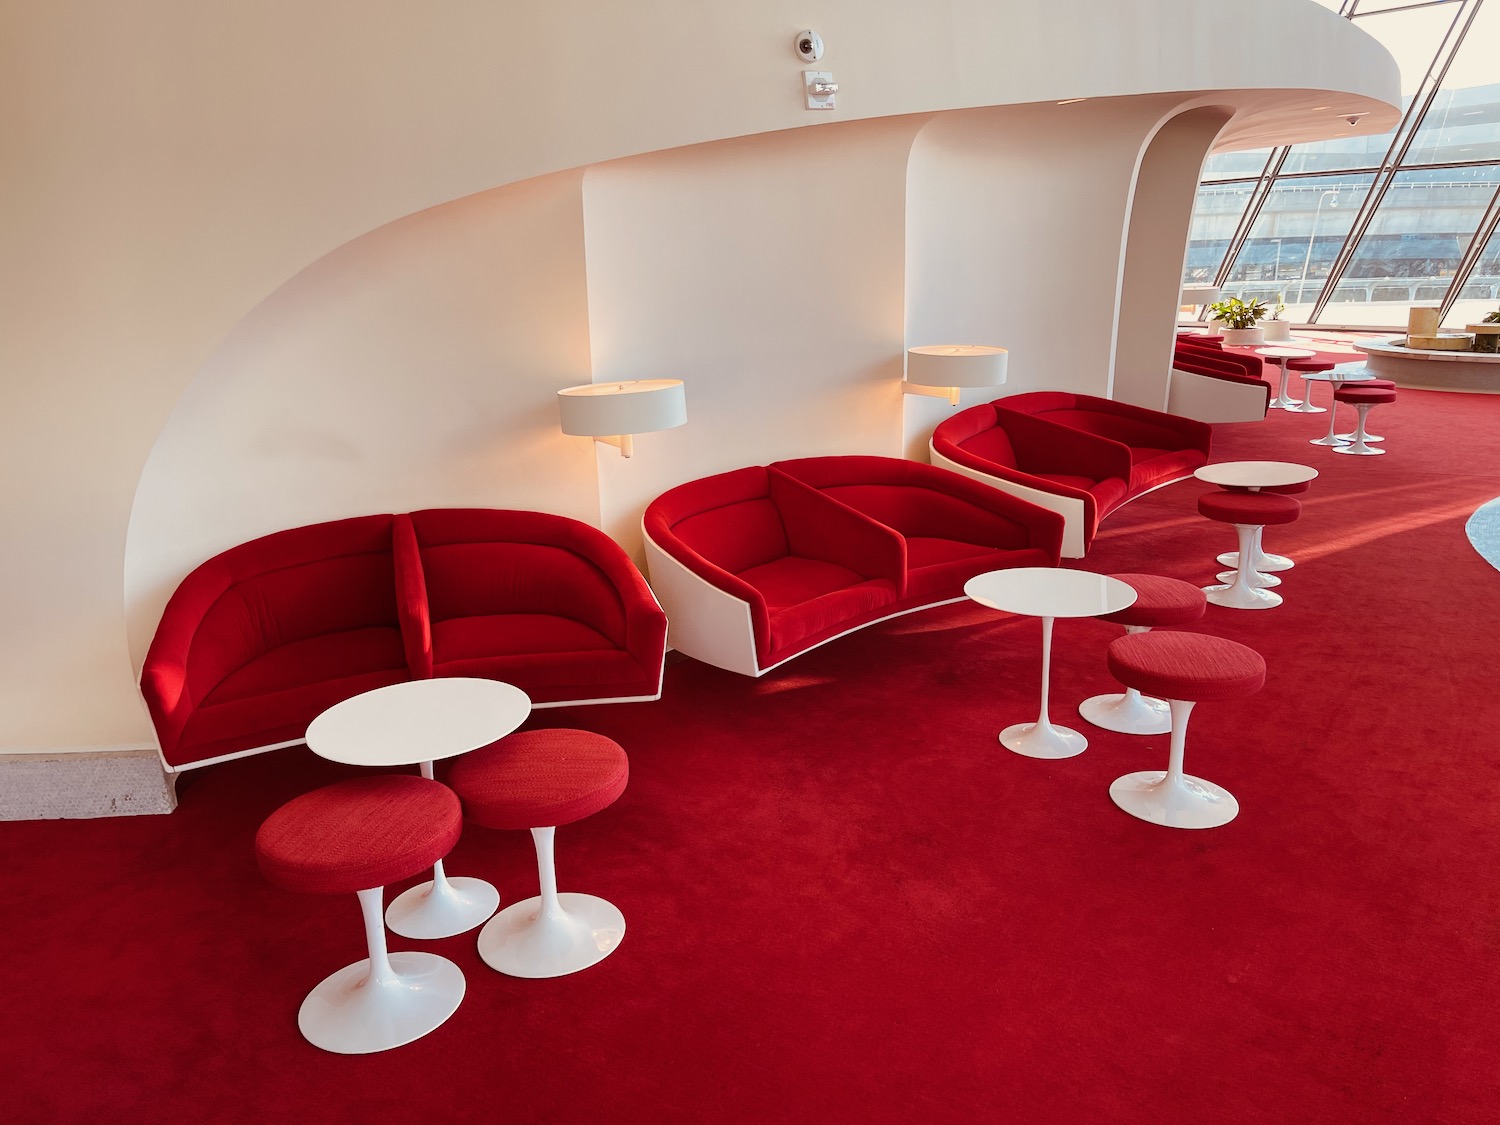 a red couches and tables in a room